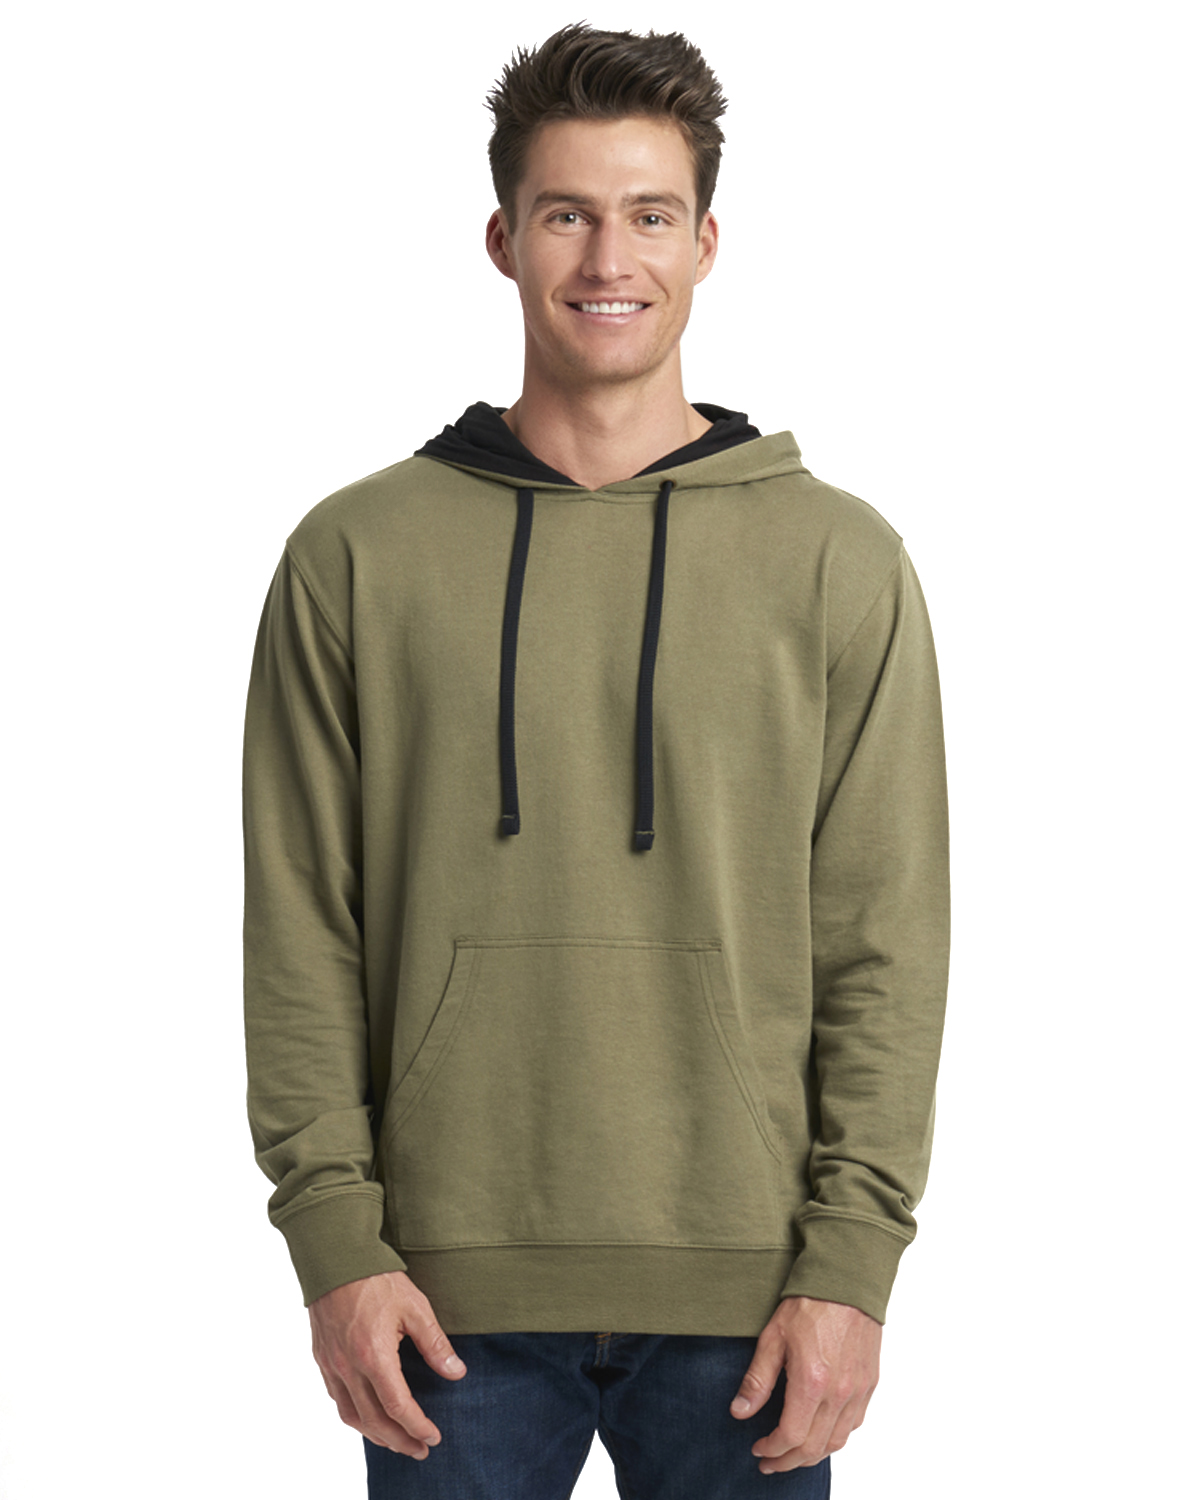 Next Level Men's Heather Gray Unisex Sueded French Terry Pullover Hoodie